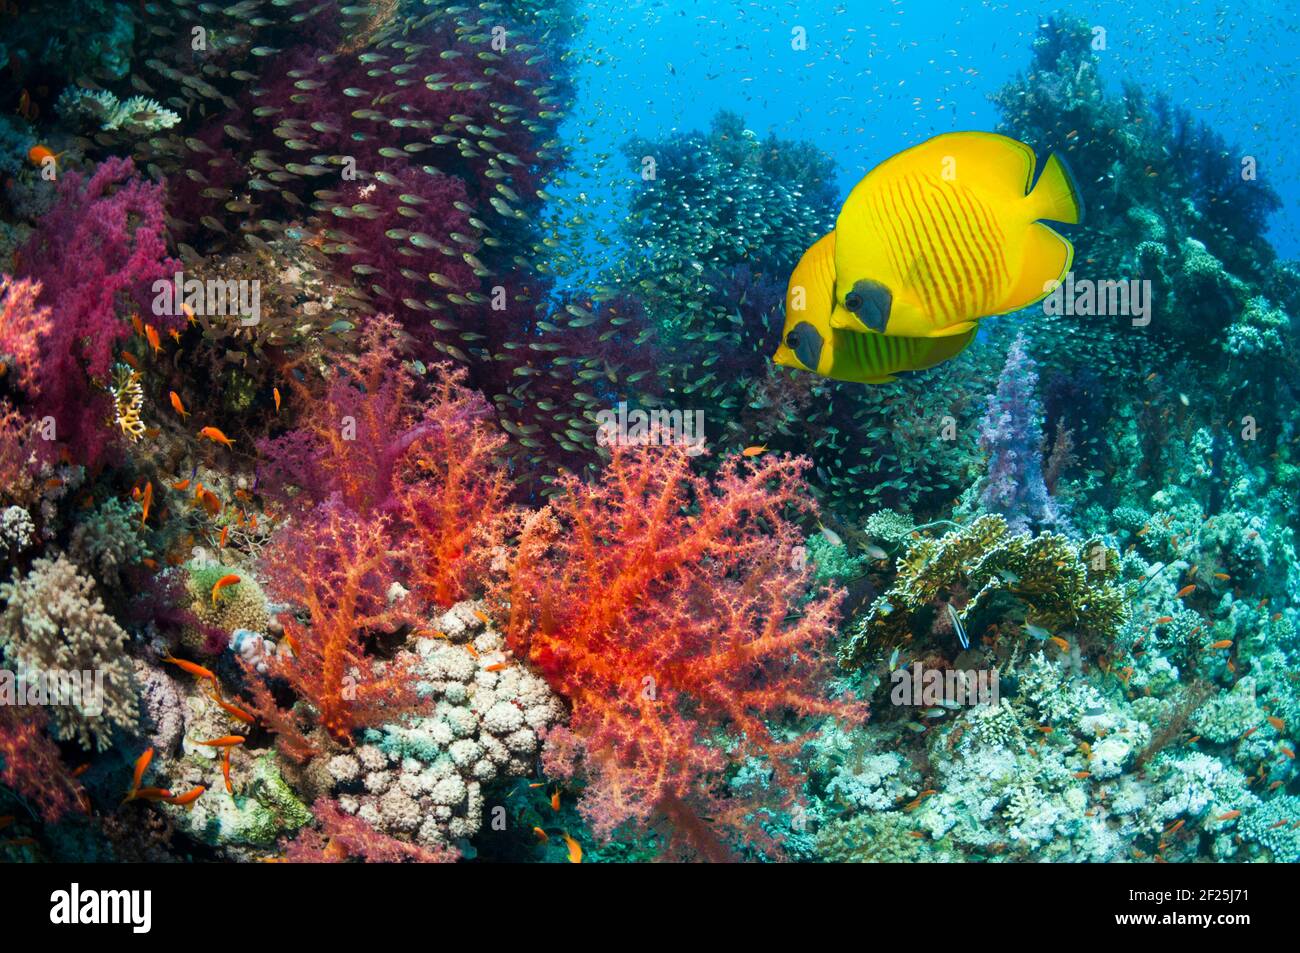 Golden butterflyfish [Chaetodon semilarvatus] swimming past soft corals [Dendronephthya sp.] and Pygmy sweepers [Parapriacanthus guetheri].  Egypt, Re Stock Photo